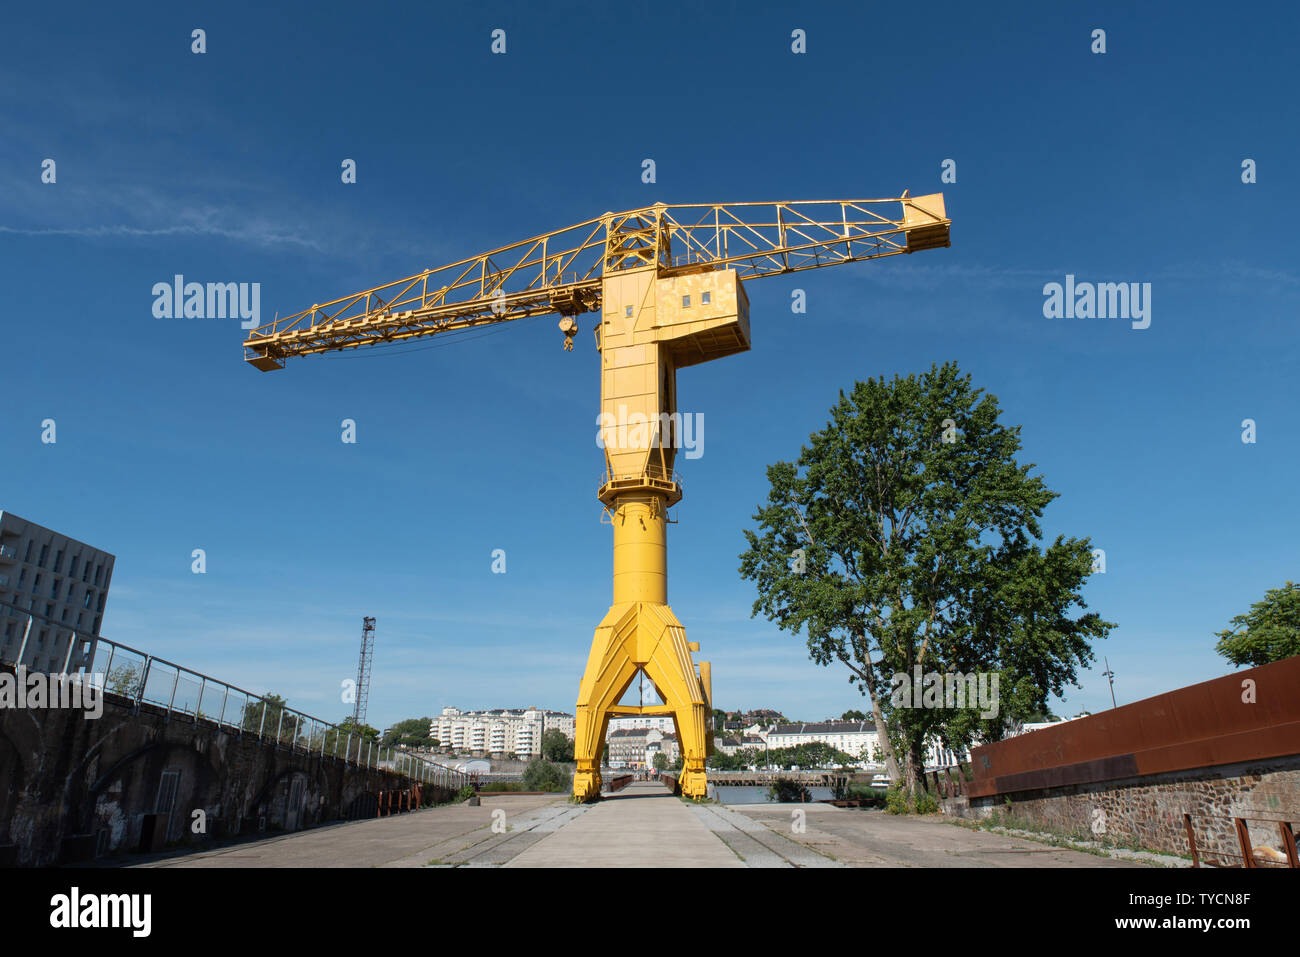 The Titan cranes are 2 cranes now decommissioned on the western tip of the island of Nantes, preserved in testimony of the industrial past of Nantes. Stock Photo